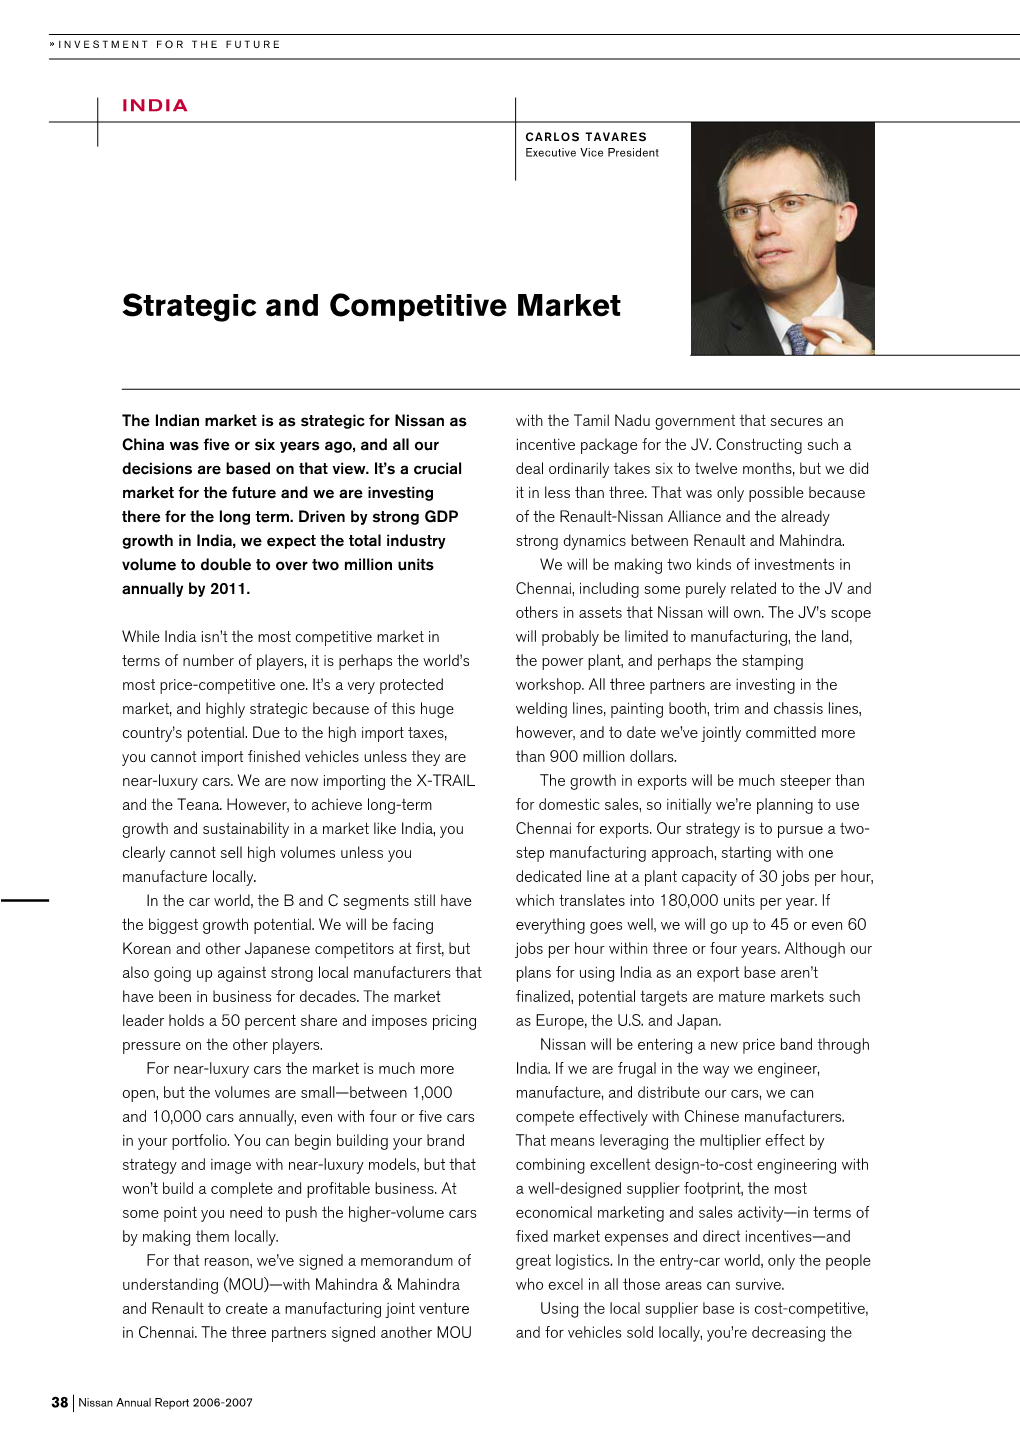 Strategic and Competitive Market